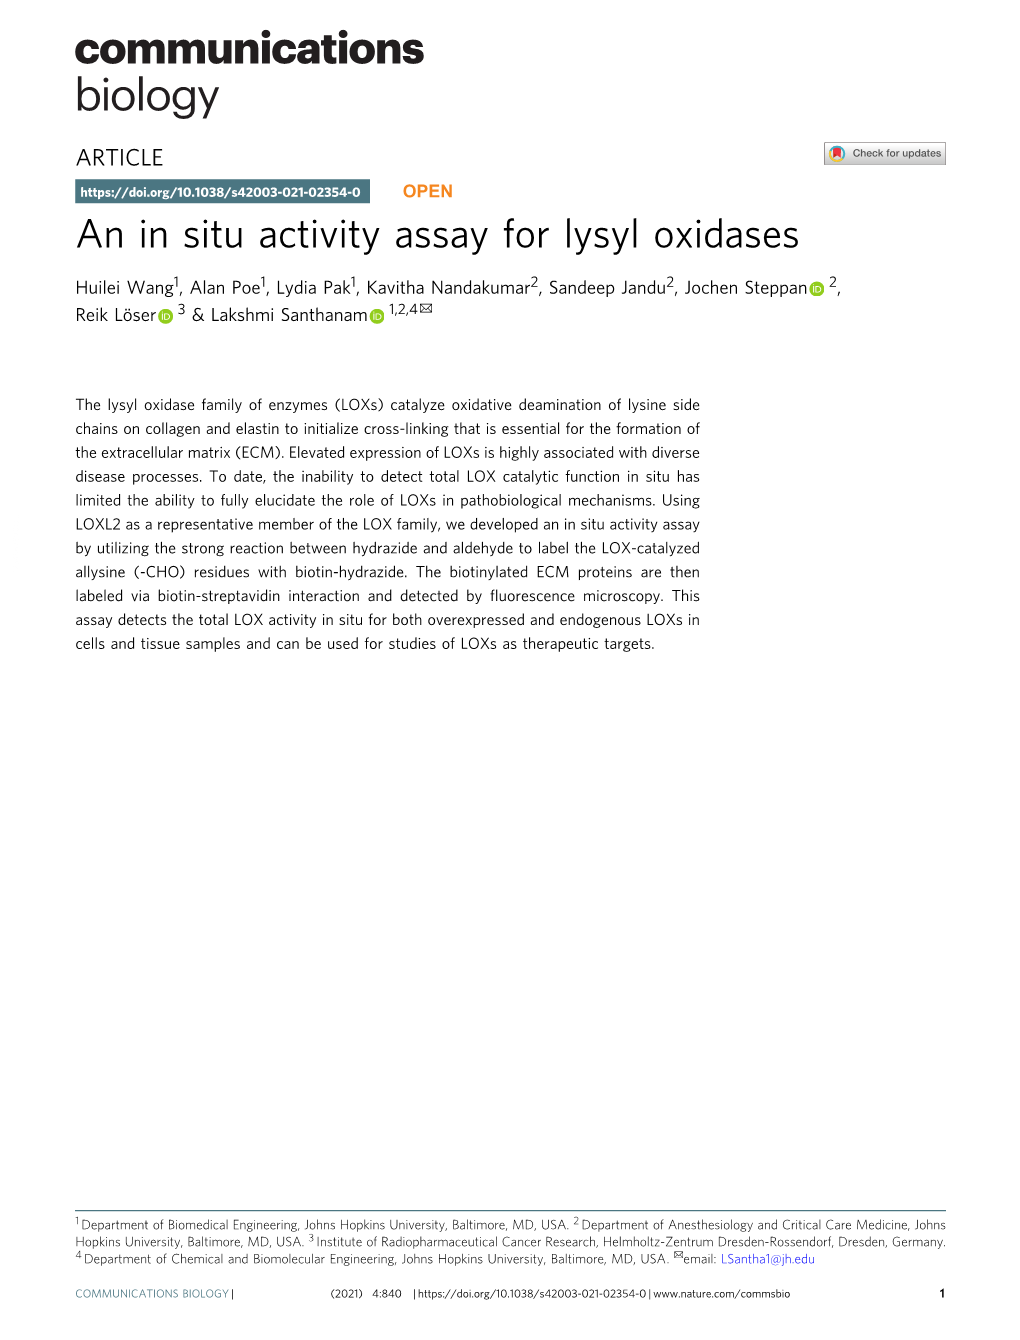 An in Situ Activity Assay for Lysyl Oxidases